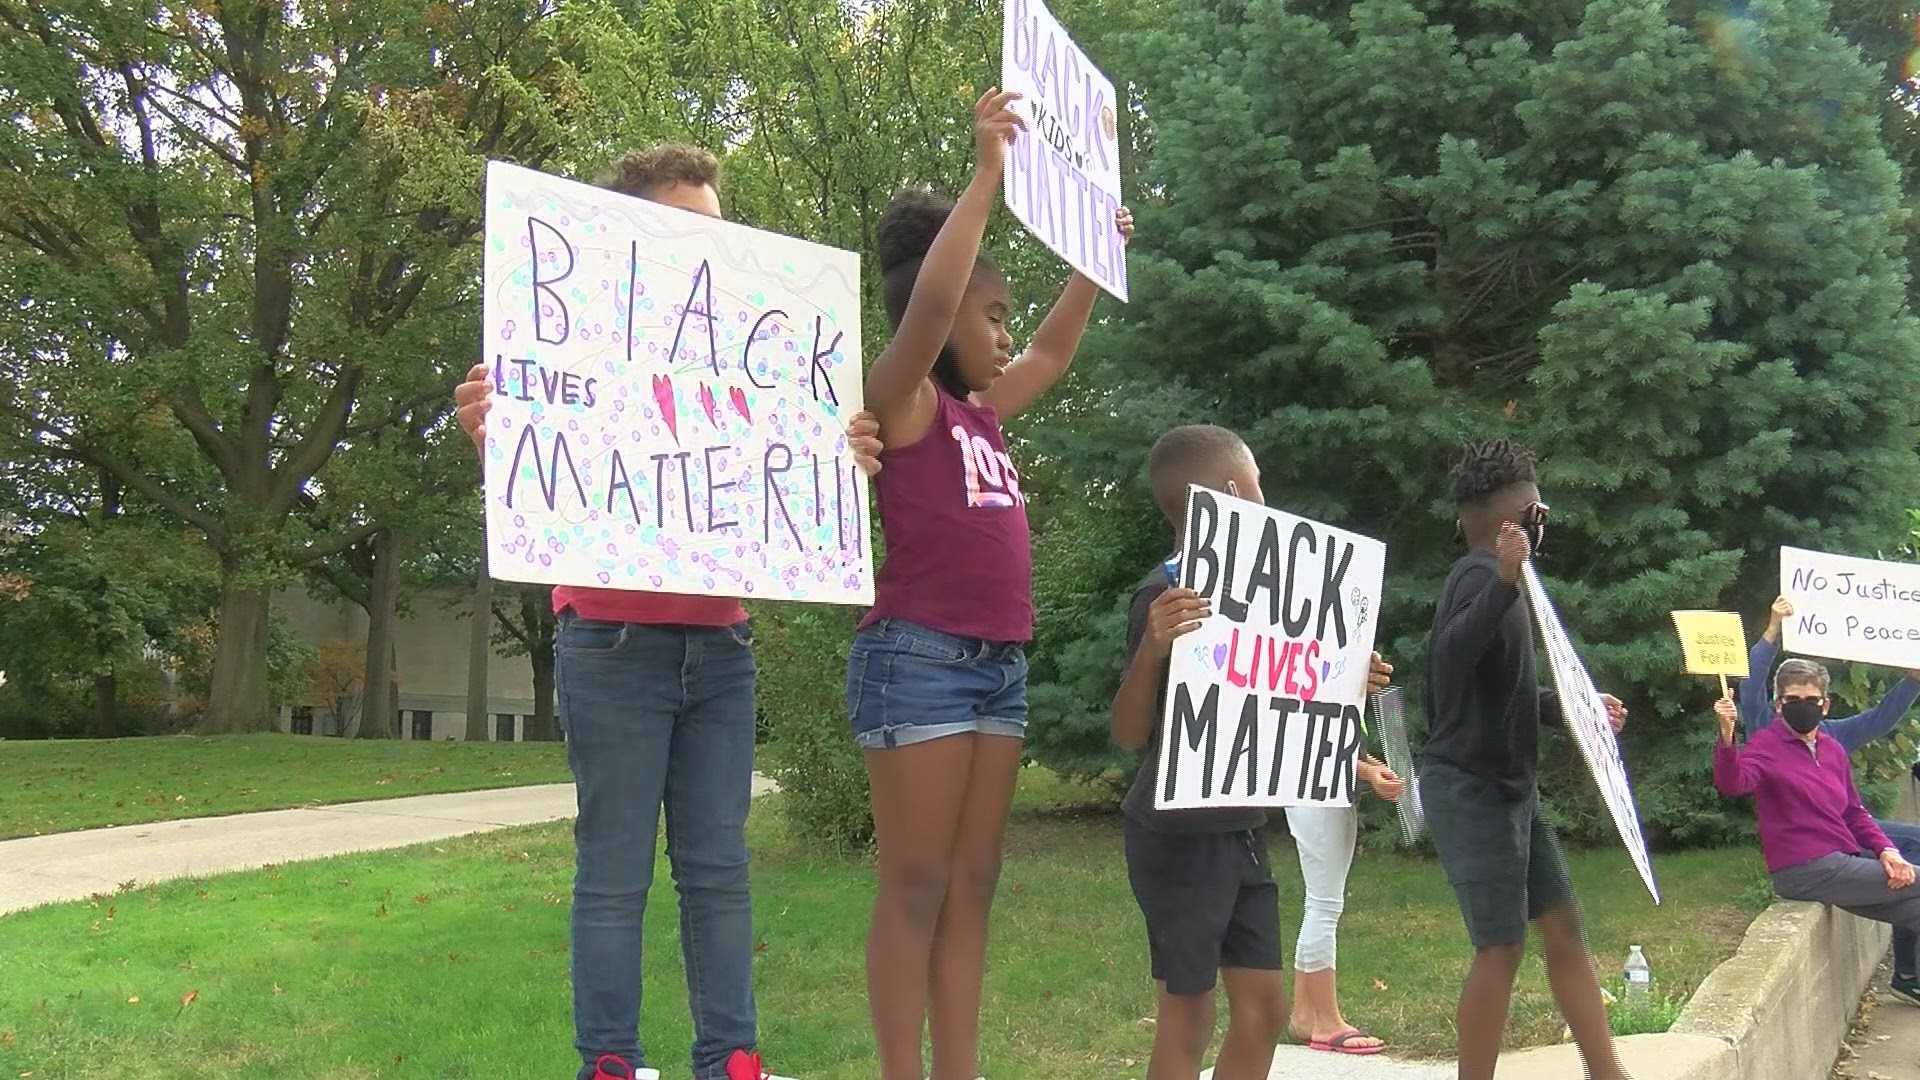 Toledo Children rallied outside Glenwood Lutheran Church for a message